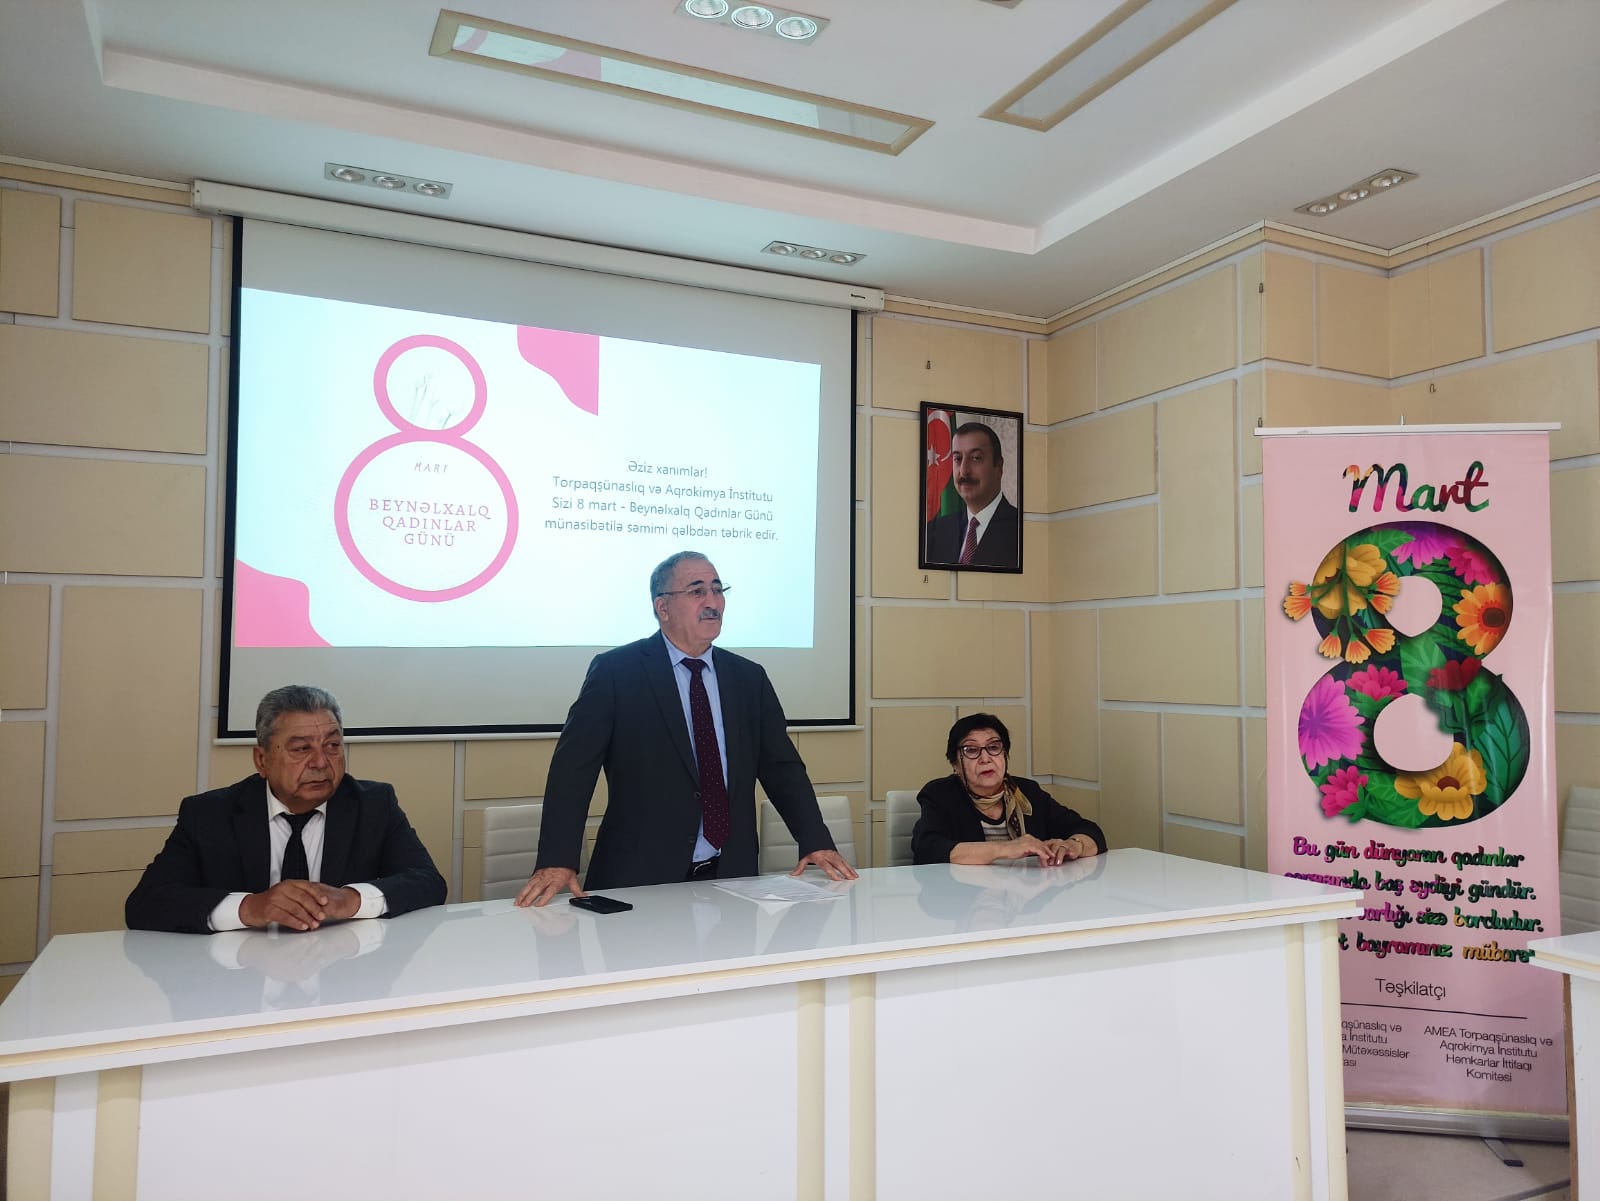 The  event was held on March 8 - International Women's Day at the Institute of Soil Science and Agrochemistry of the Ministry of Science and Education of the Republic of Azerbaijan.